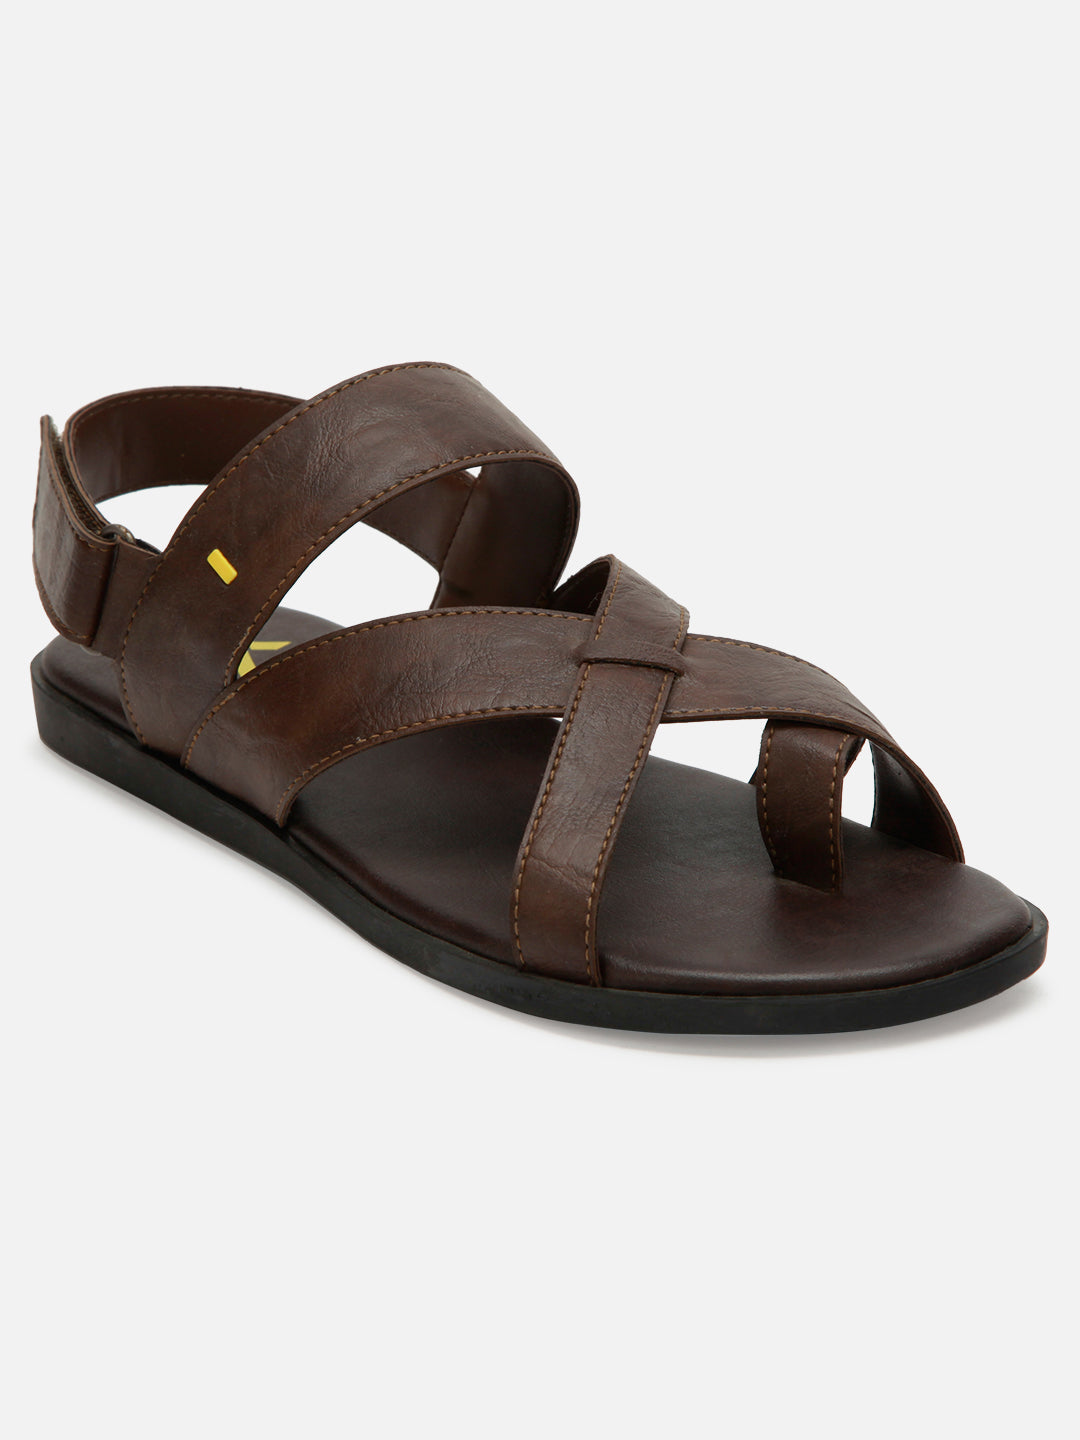 Men's Brown Cross Strap Casual (IX5002) - Sandals/Slippers | Shop Rs. 1,612 | iD Shoes